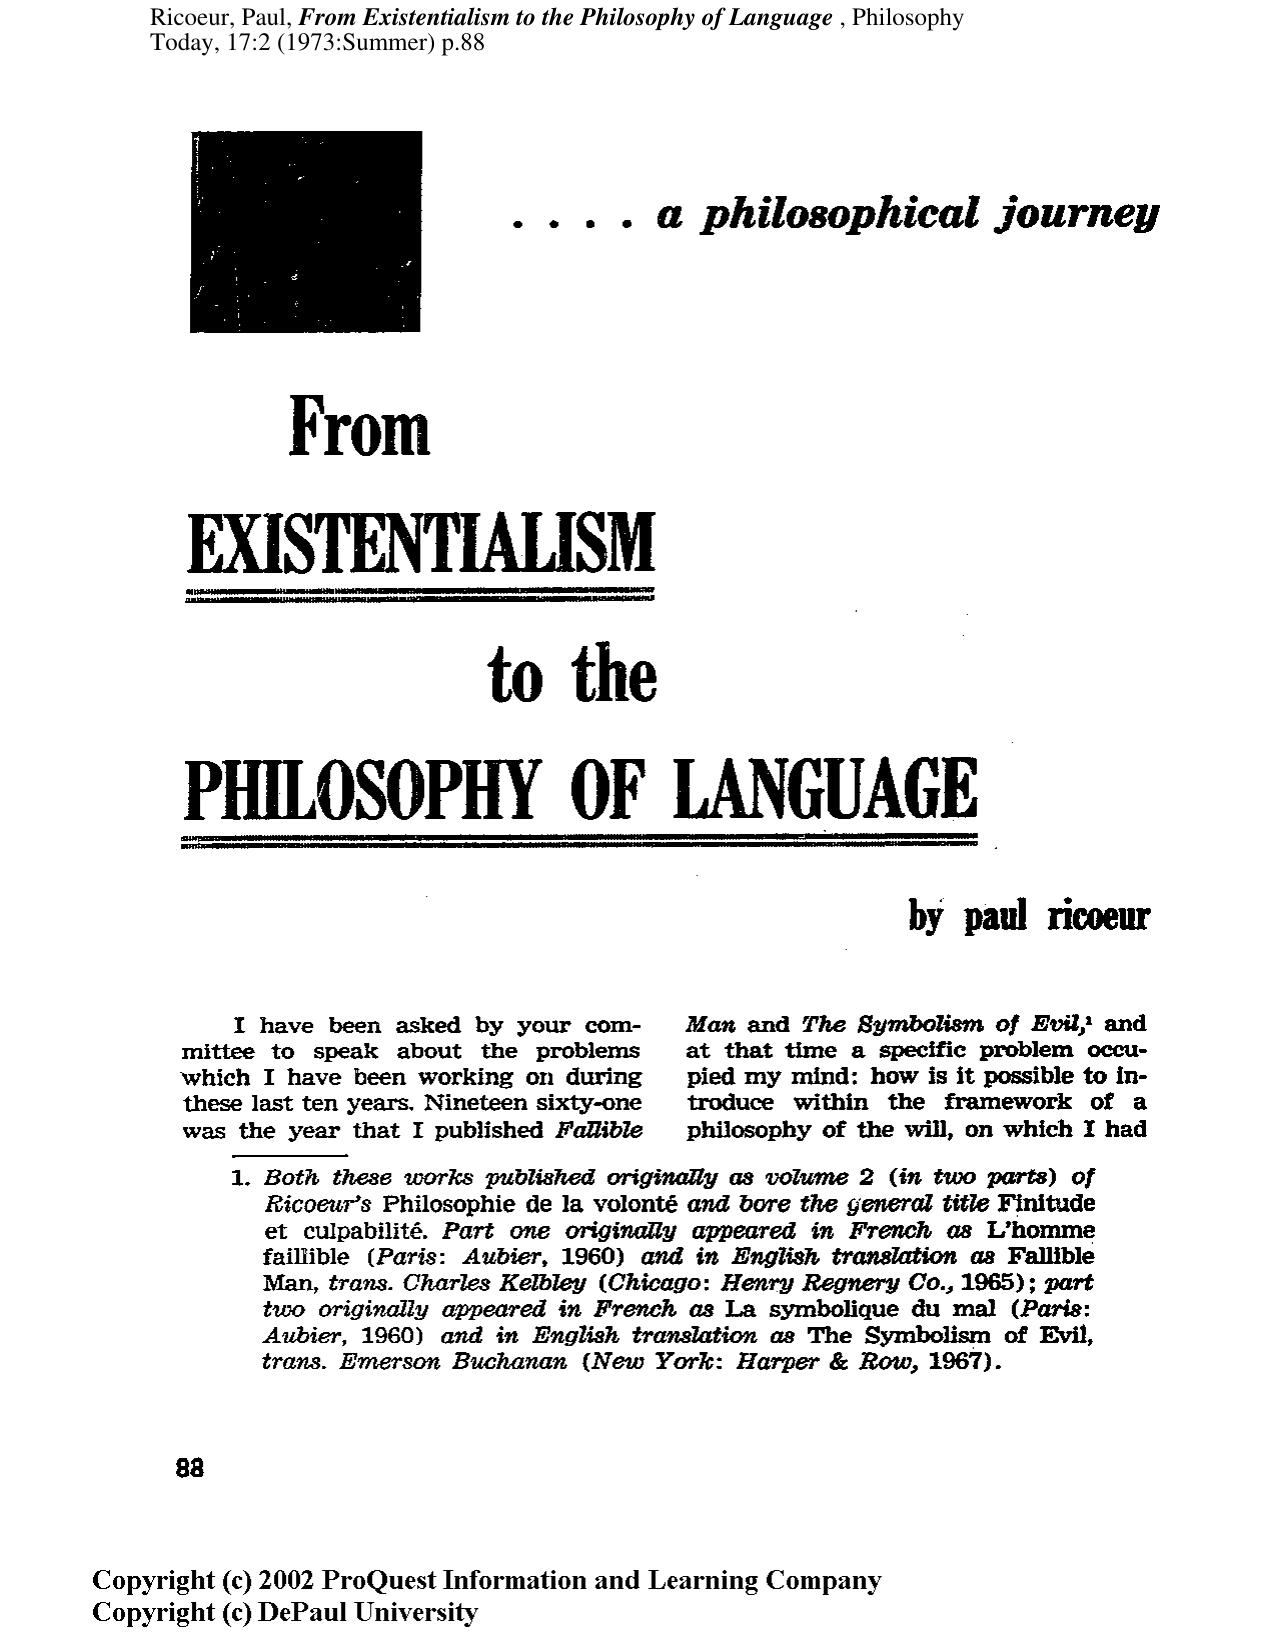 From Existentialism to the Philosophy of Language - Article